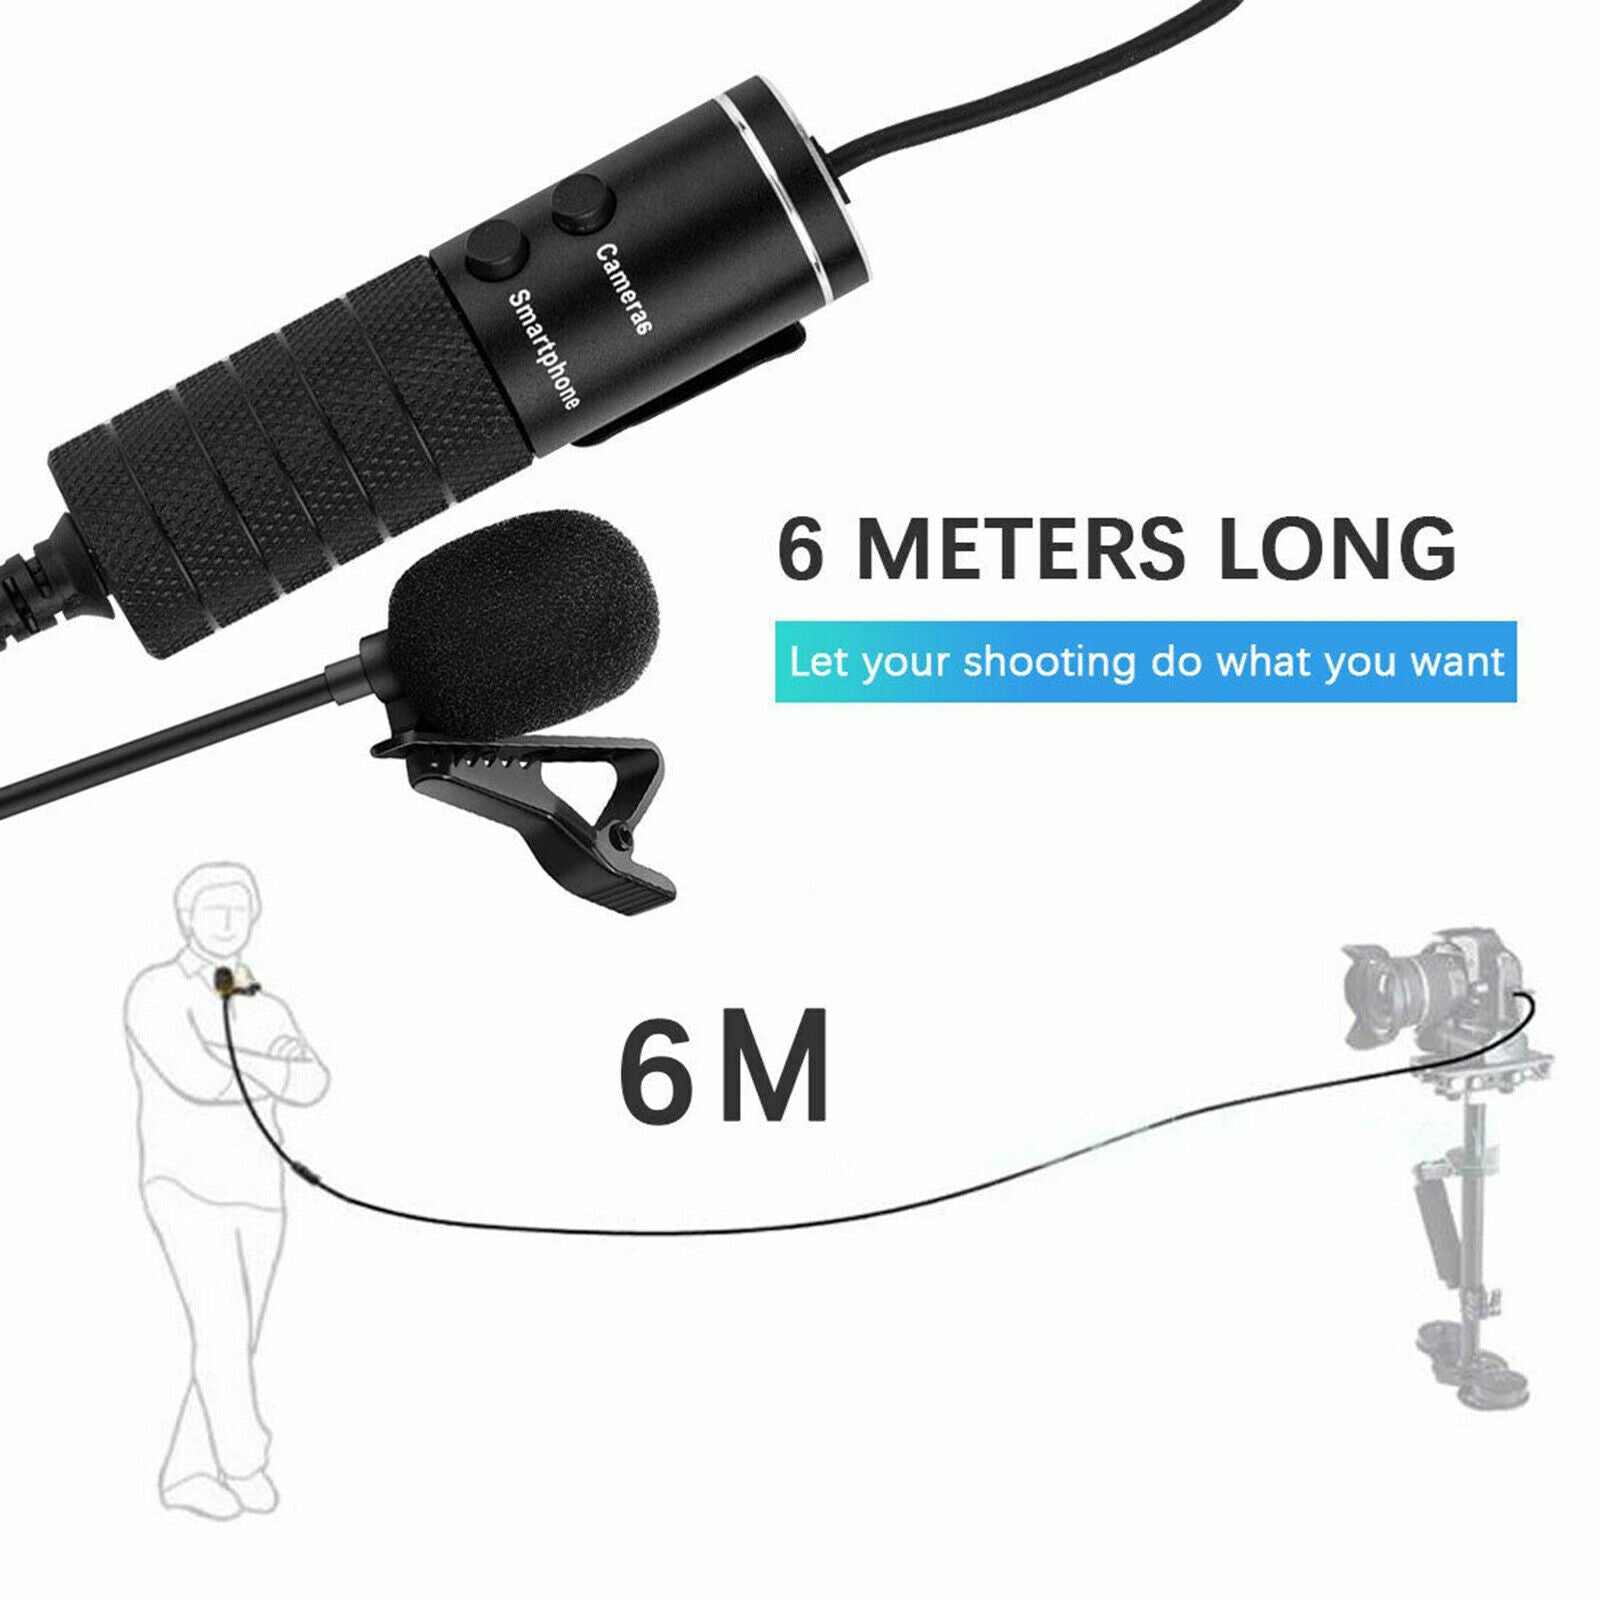 Lapel Mic Stereo 3.5mm   Gauge Condenser Recording Lavalier Microphone